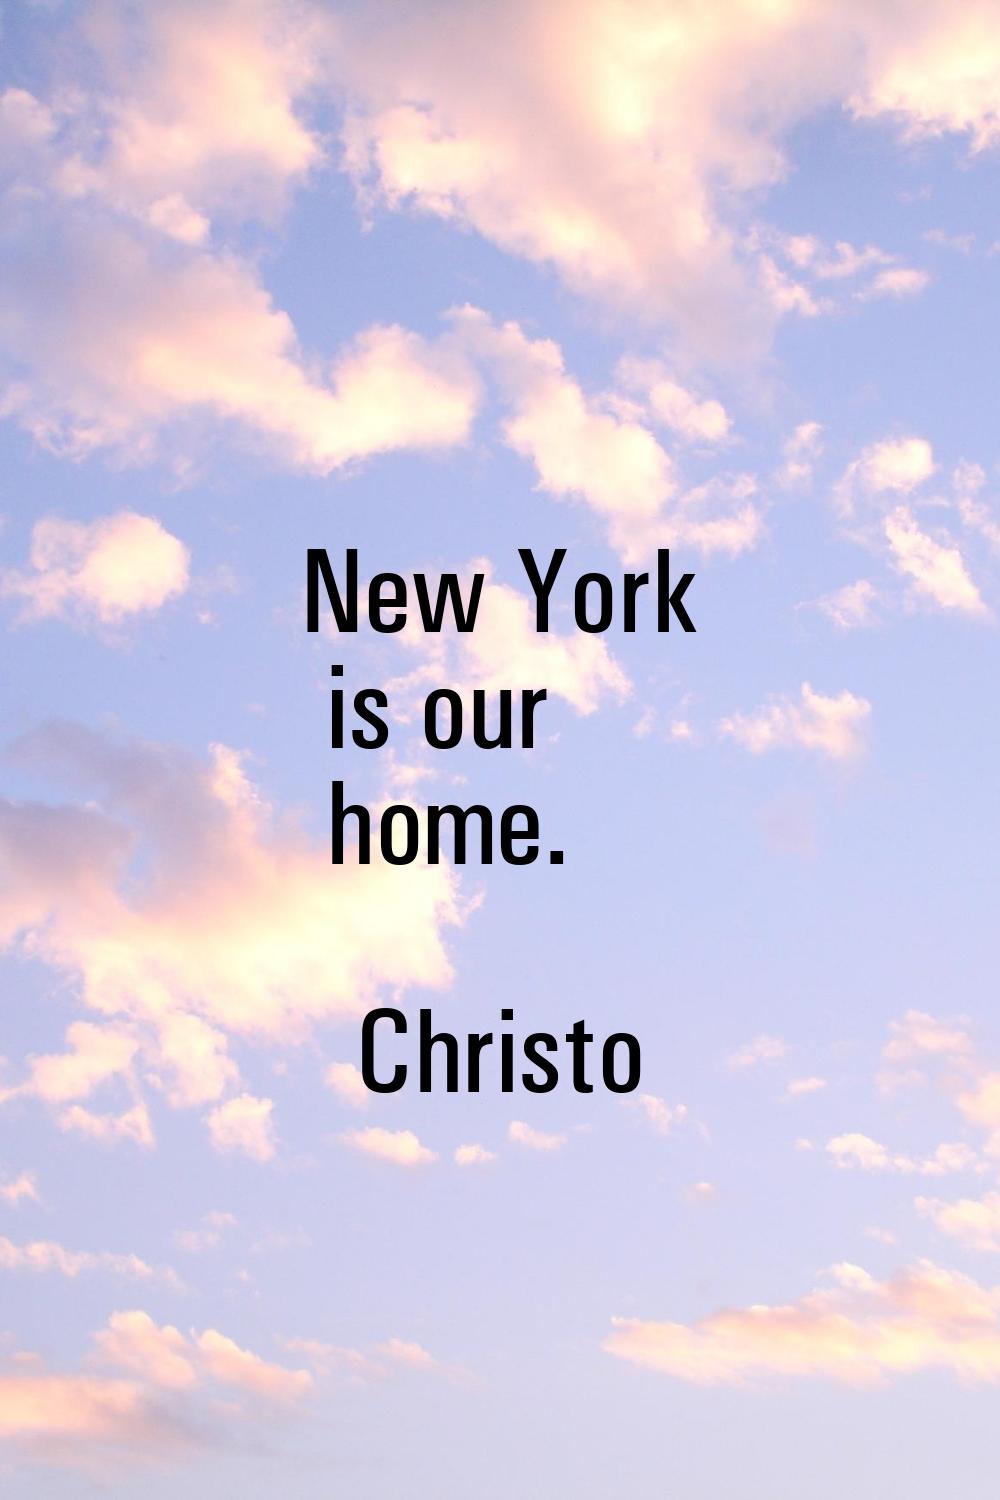 New York is our home.